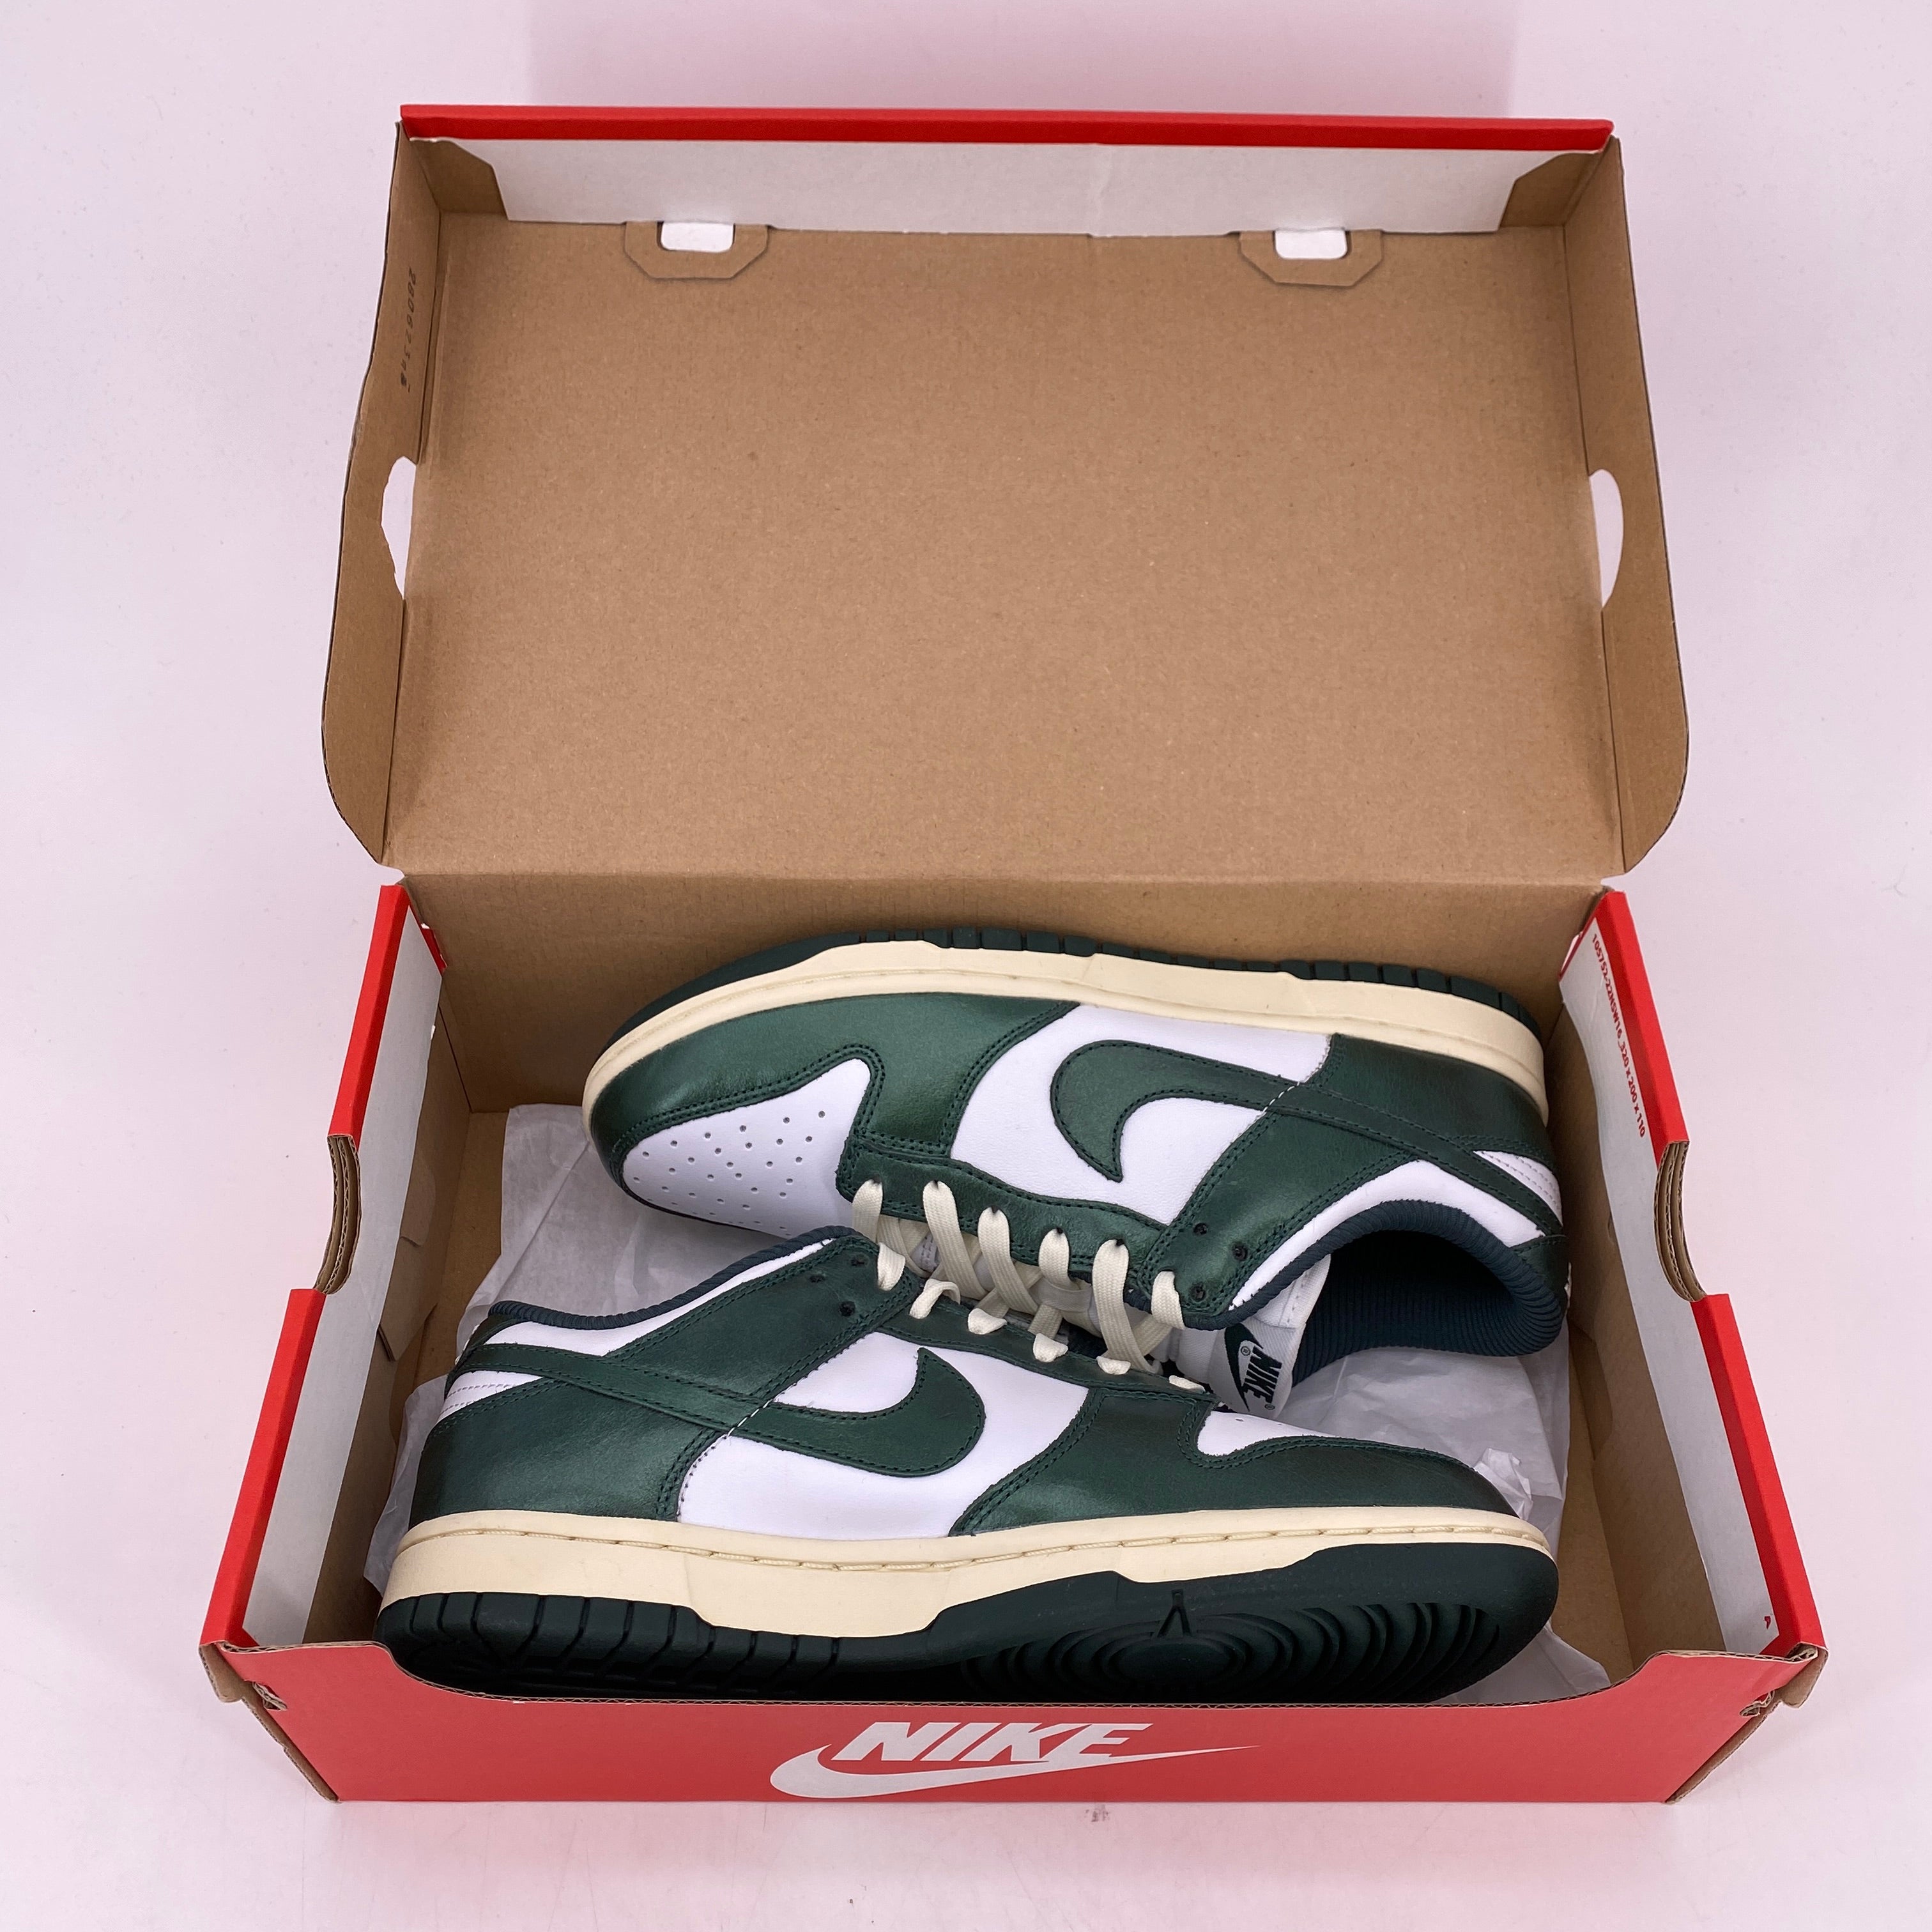 Nike (W) Dunk Low &quot;Vintage Green&quot; 2022 New Size 8.5W